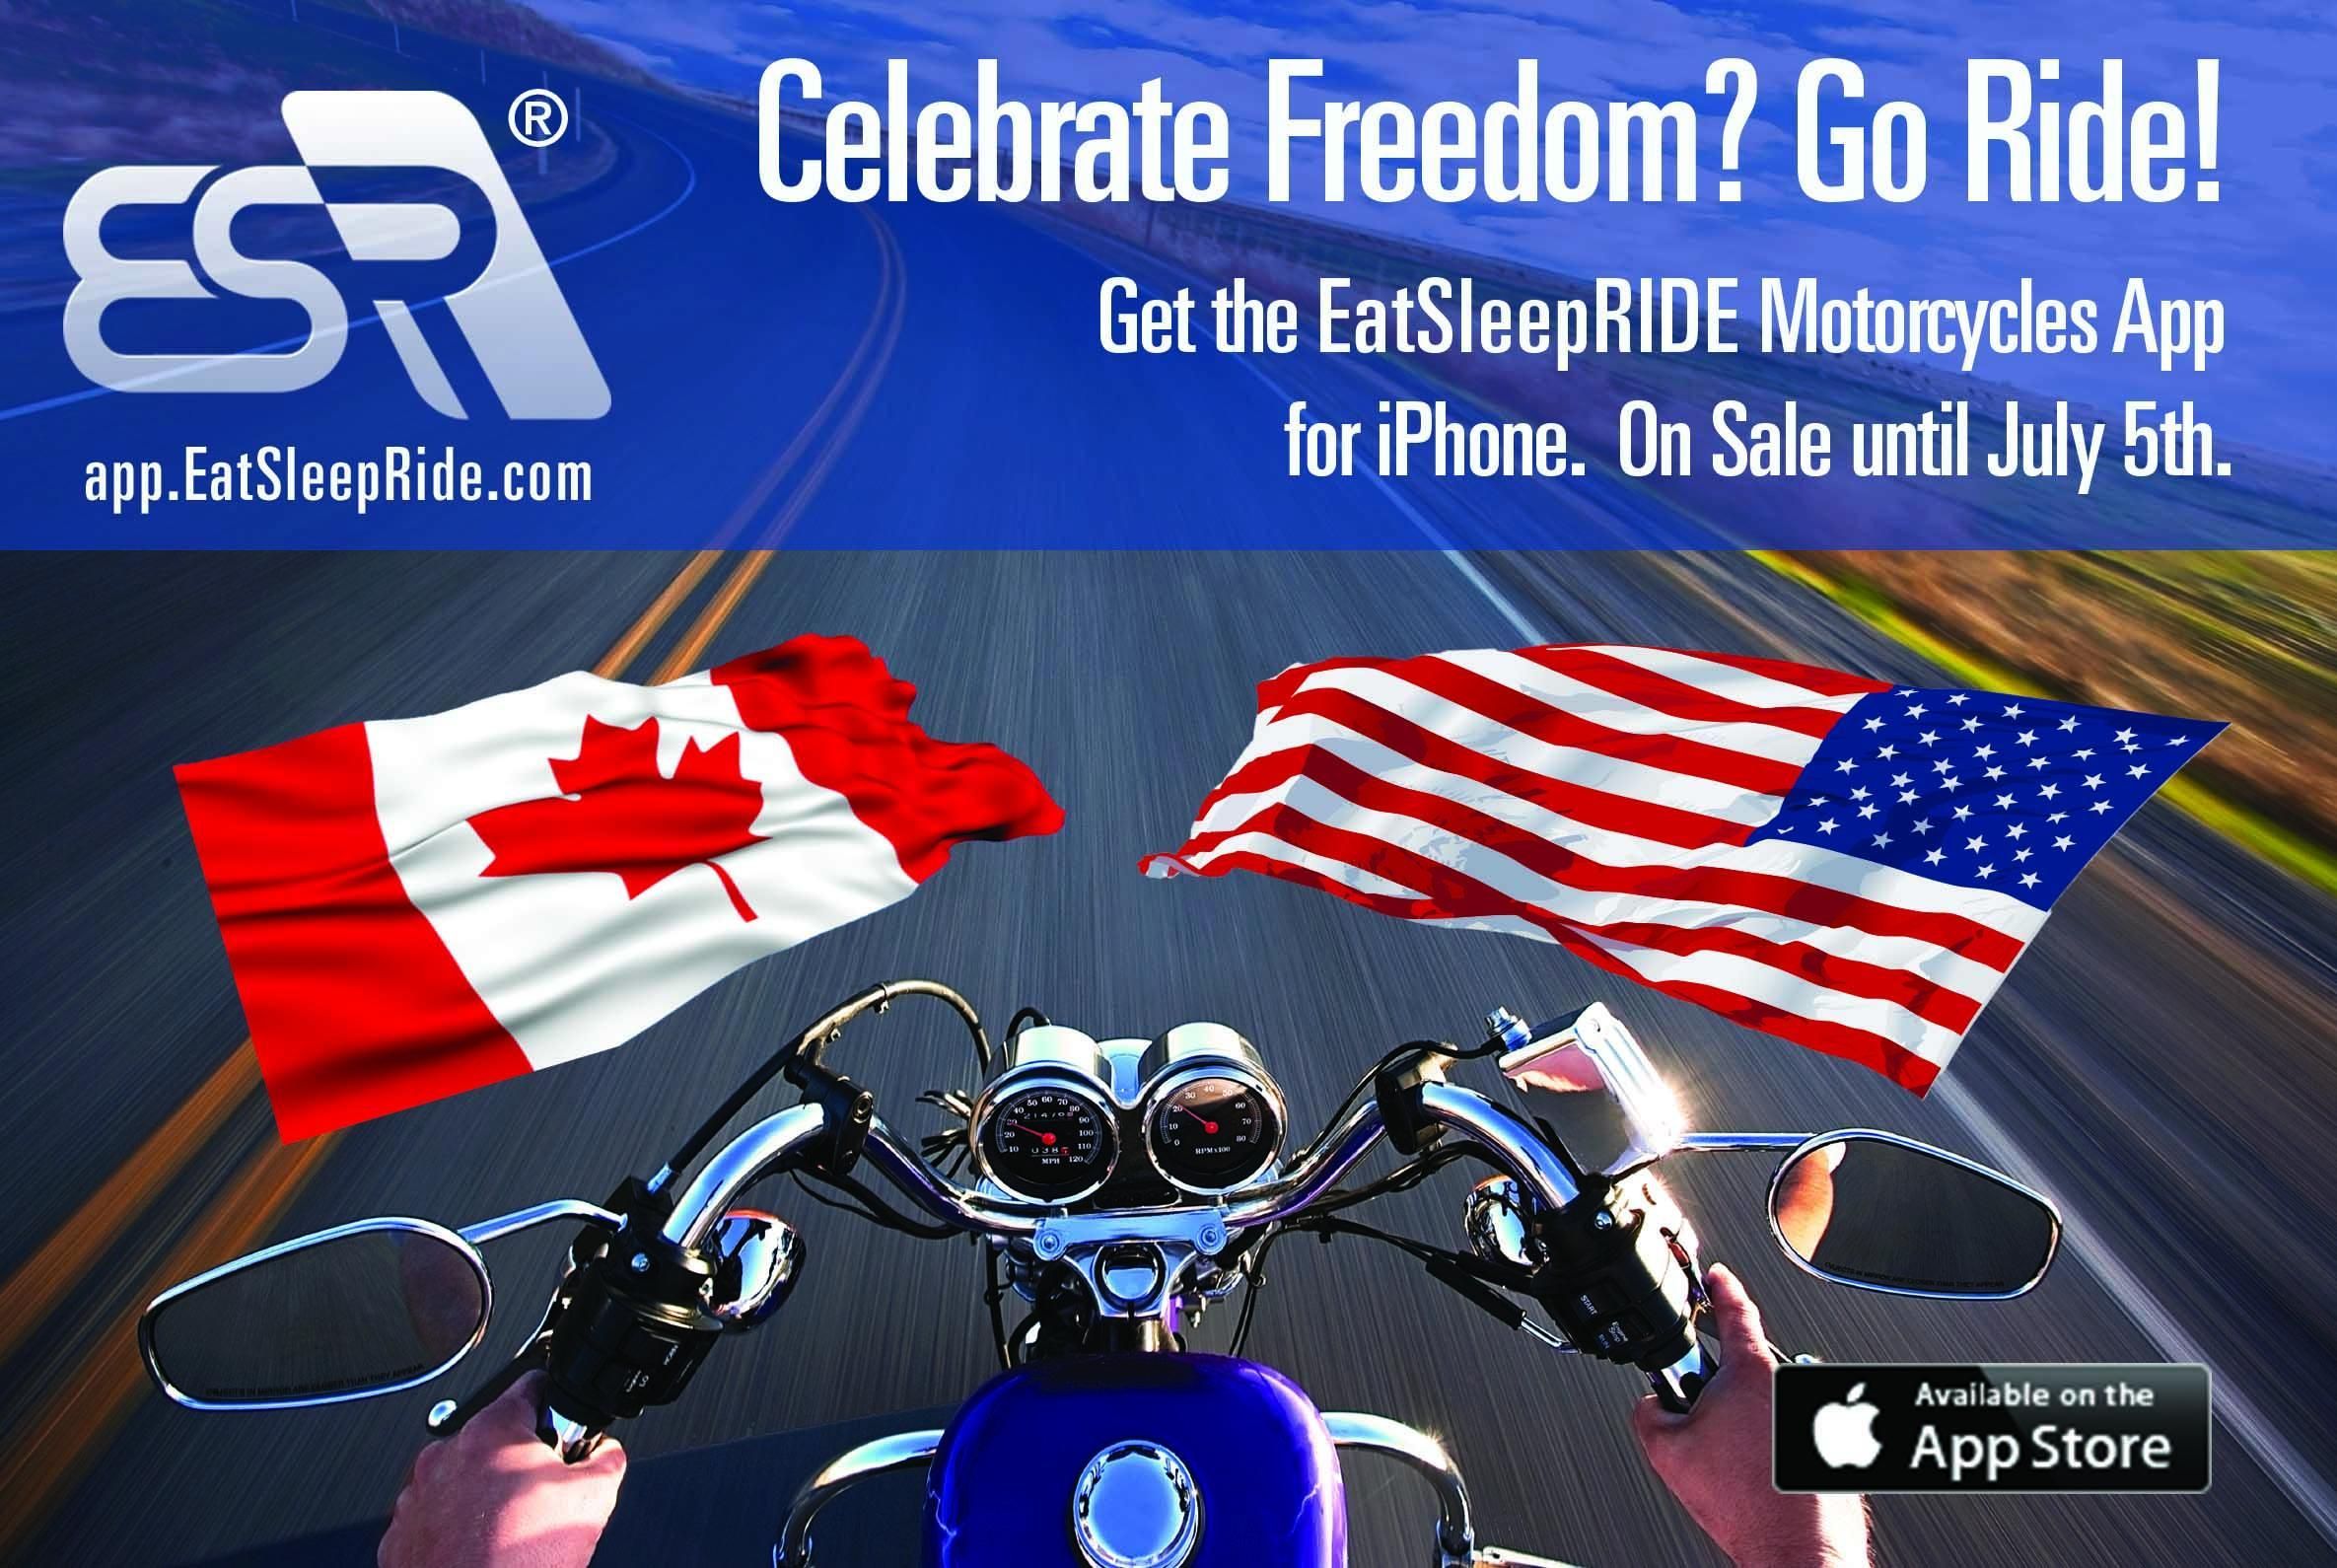 Celebrate Freedom? Go Ride! On Sale until July 5th